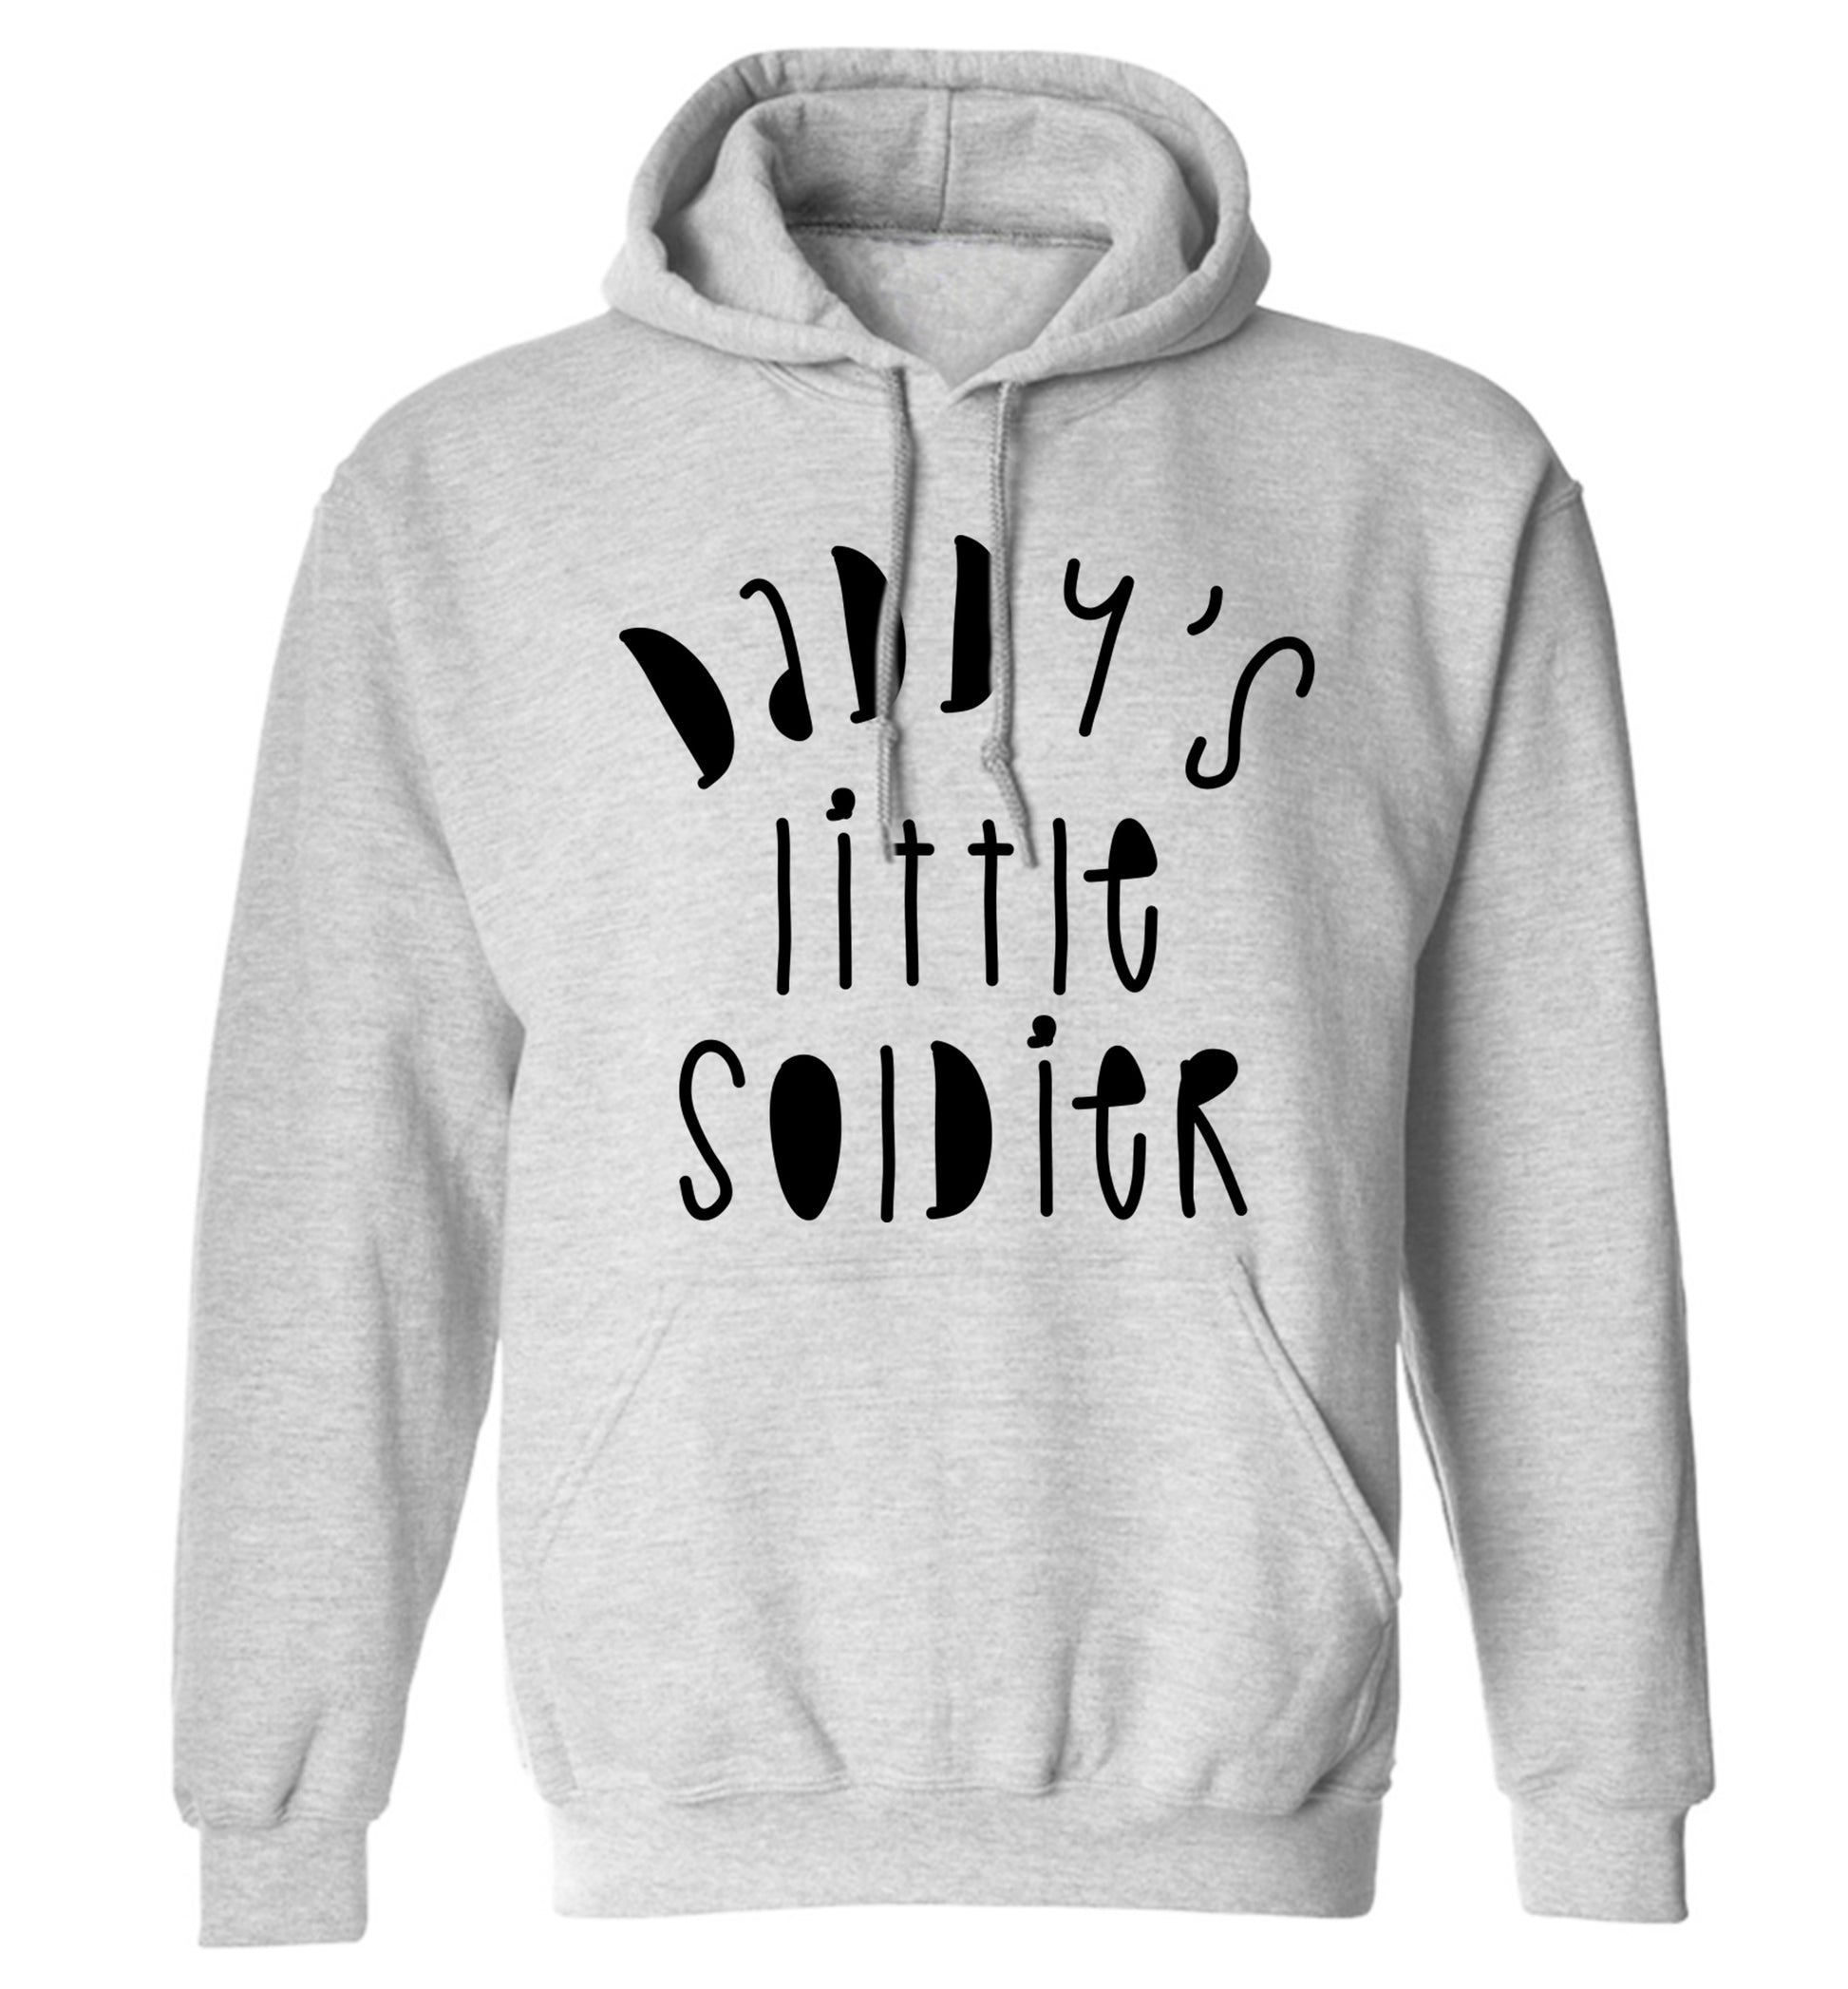 Daddy's little soldier adults unisex grey hoodie 2XL